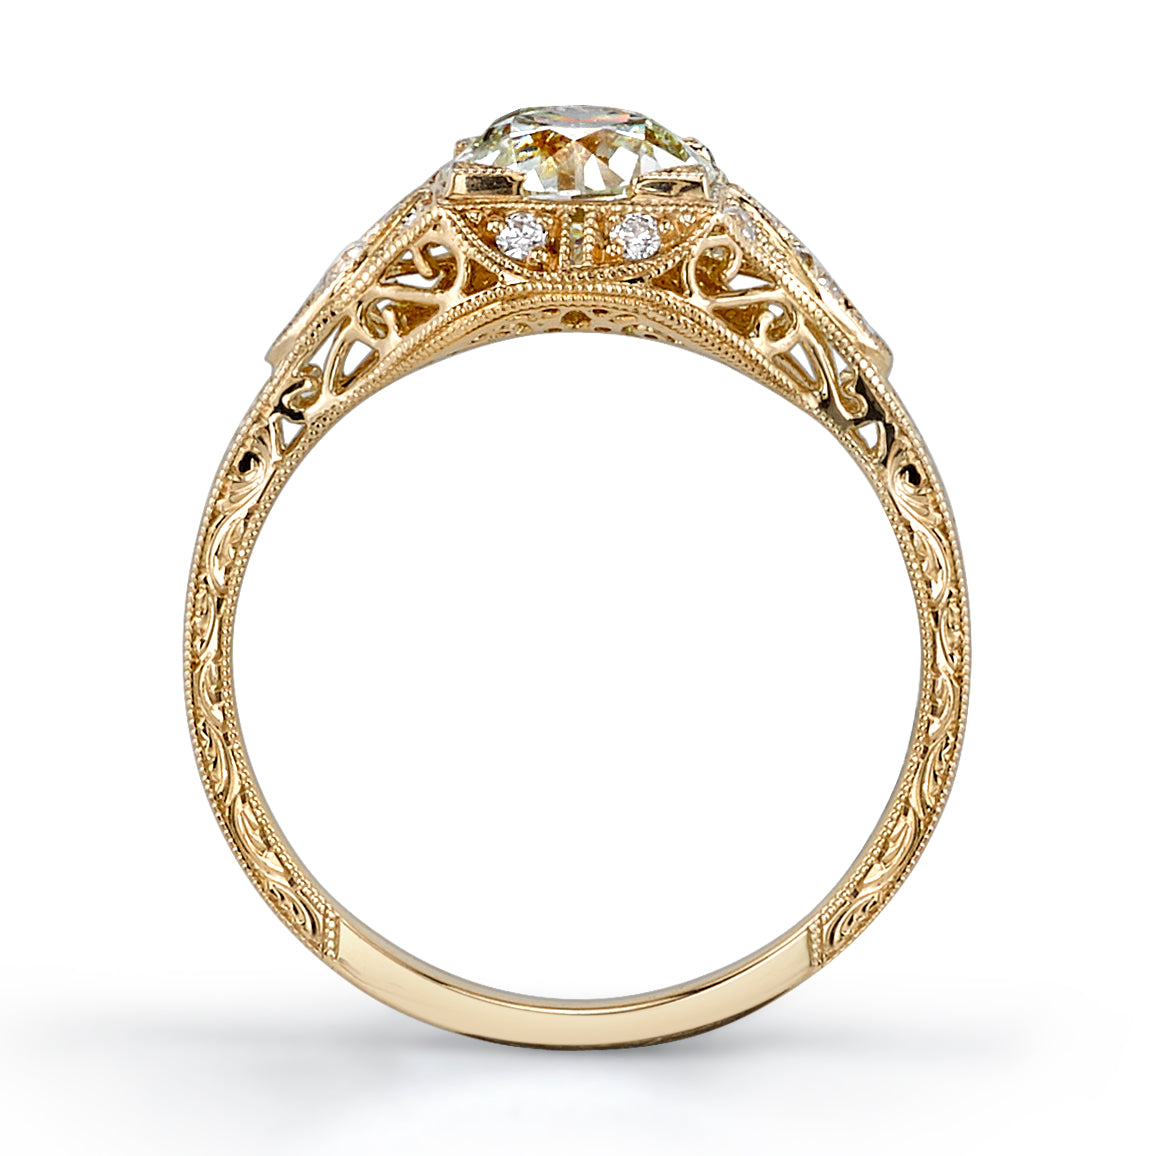 SINGLE STONE BRIGETTE RING featuring 1.24ct M/VS2 GIA certified old European cut diamond with 0.19ctw old European cut accent diamonds set in a handcrafted 18K yellow gold mounting.